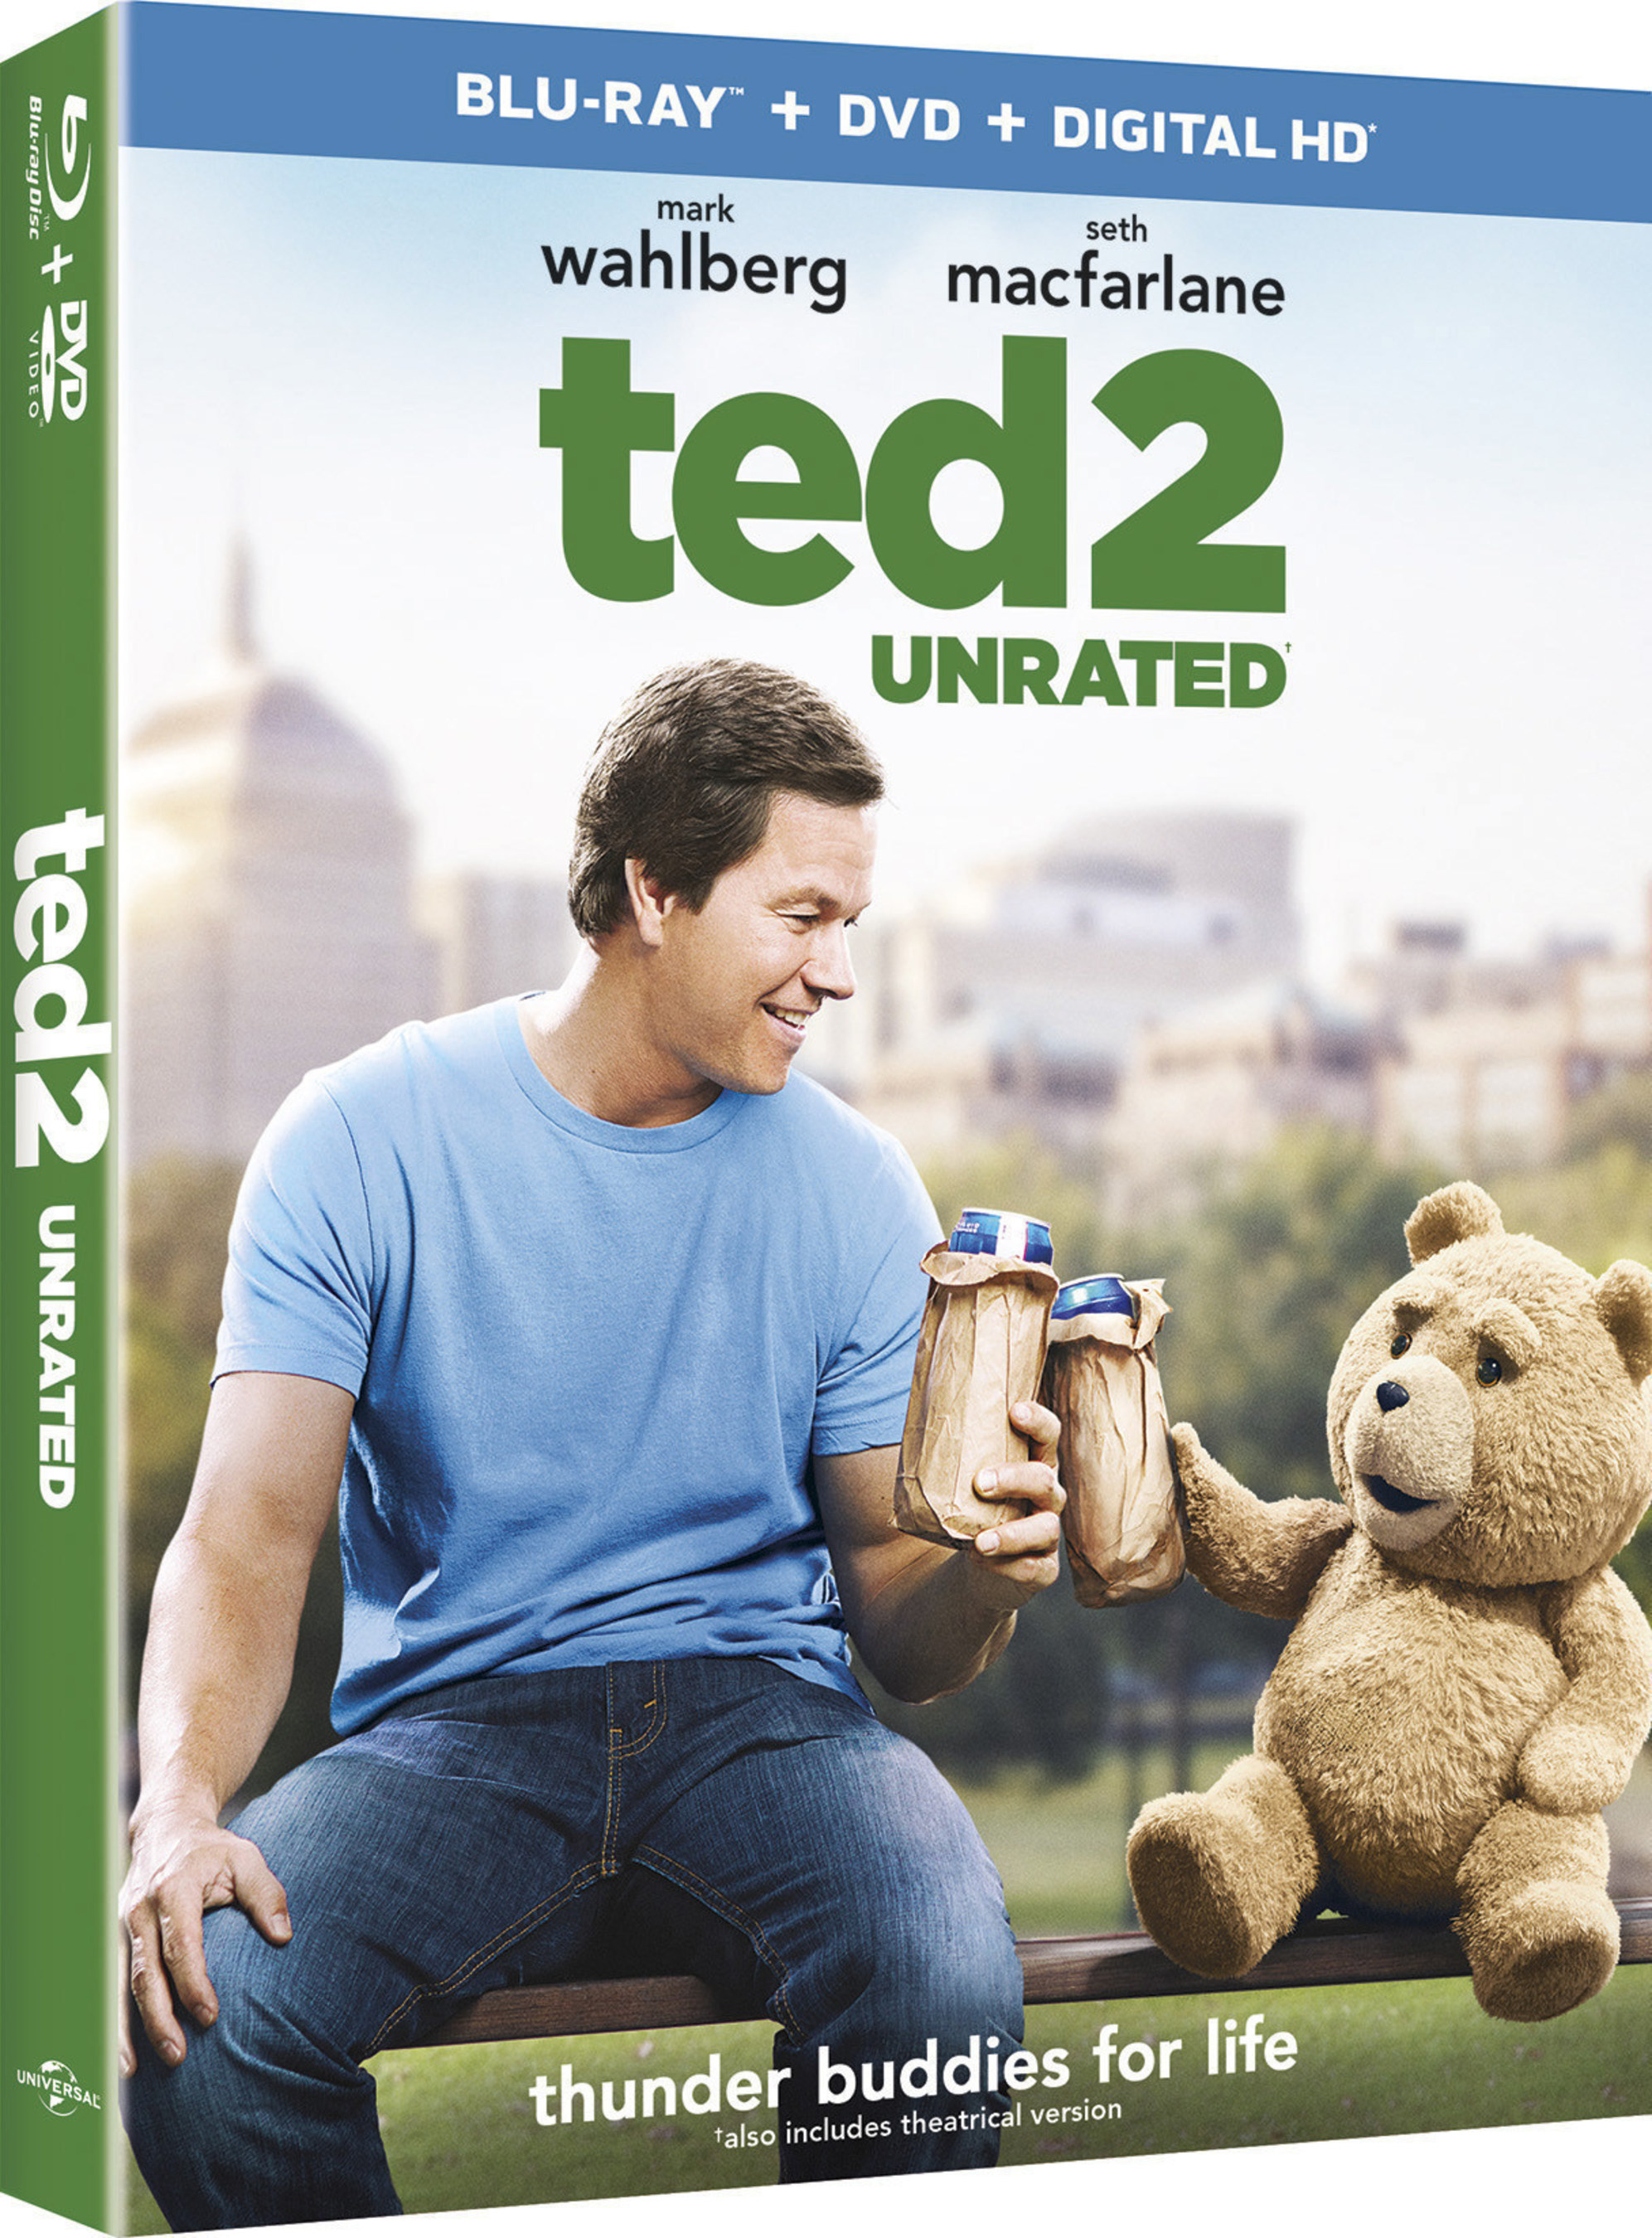 TED 2 WILL BE AVAILABLE ON BLU-RAY, DVD AND DIGITAL HD ON DECEMBER 15TH FROM UNIVERSAL PICTURES HOME ENTERTAINMENT.